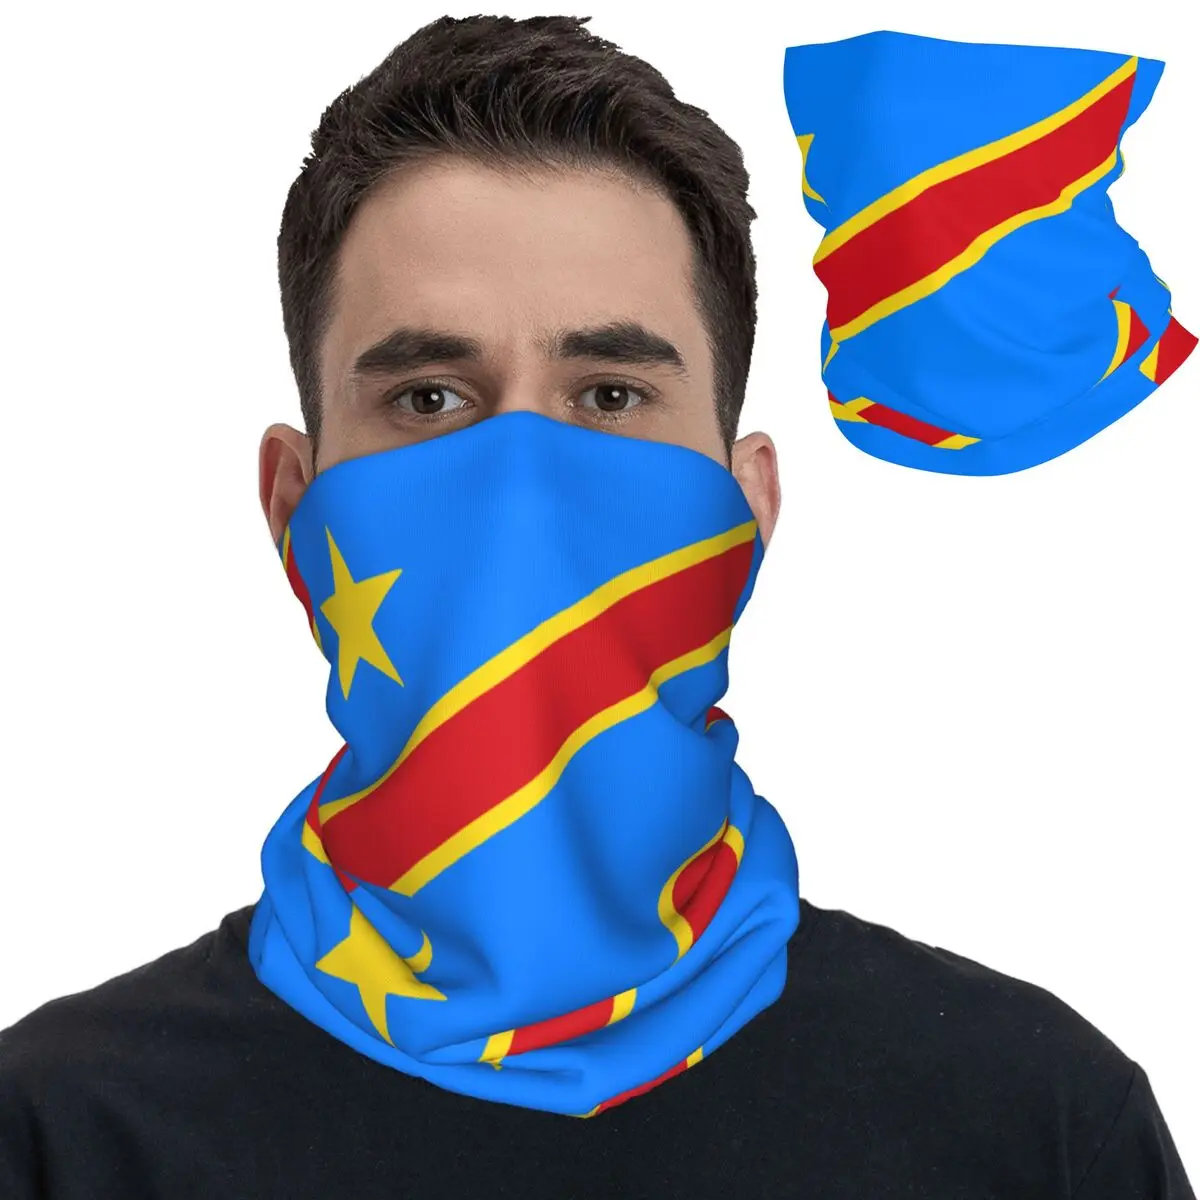 

Flag Of Congo Kinshasa Zaire Bandana Neck Cover Printed Wrap Scarf Warm Face Mask Cycling Unisex Adult Windproof